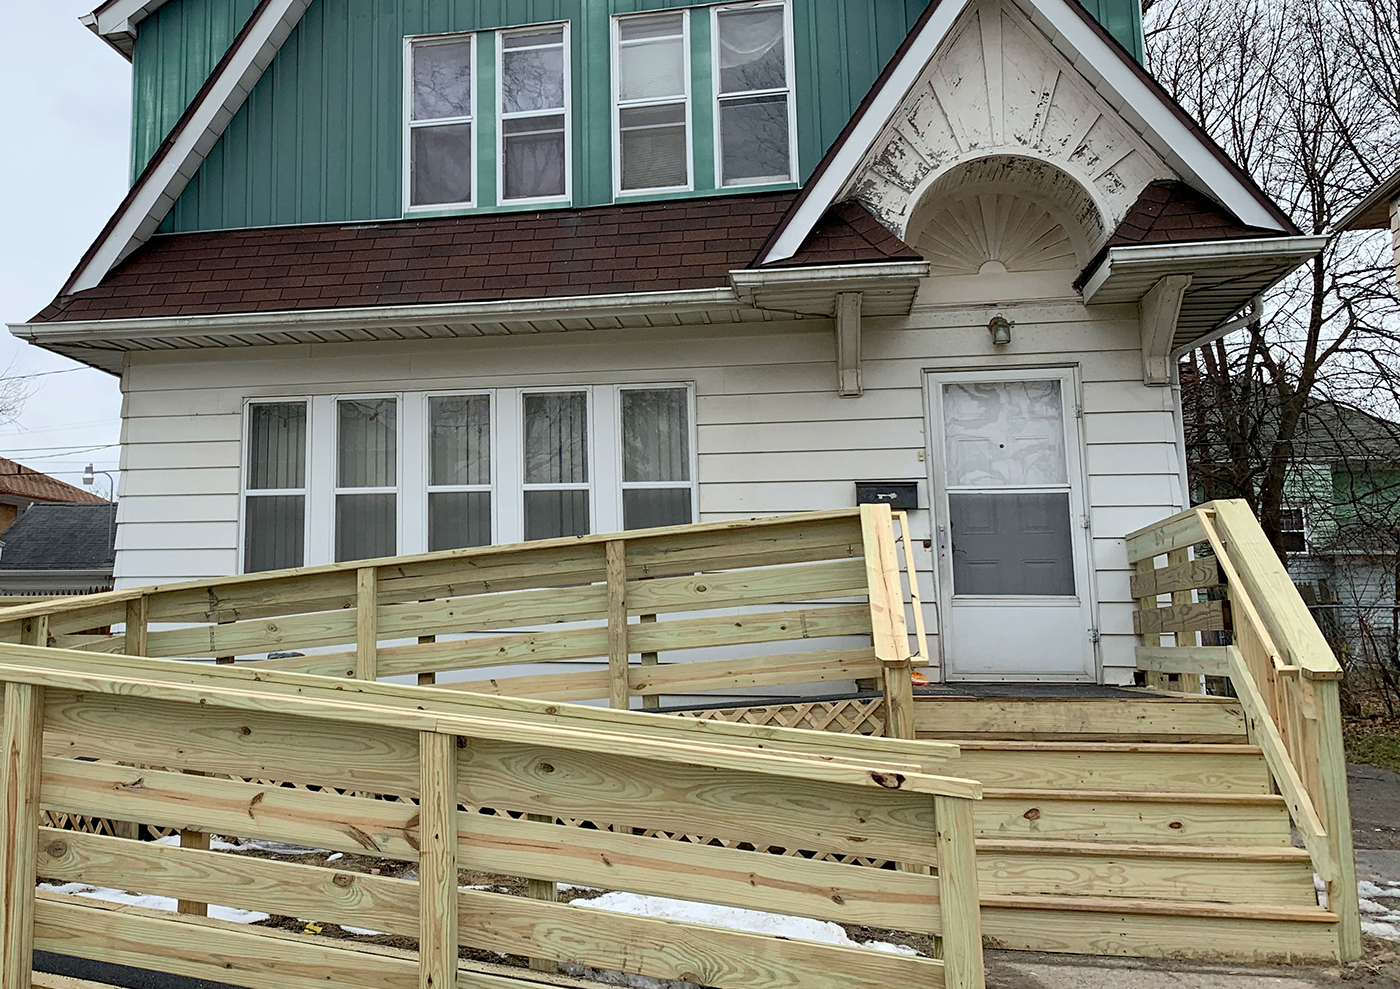 A house in Flint, Michigan, that has a brand new wheel chair ramp in front of it.